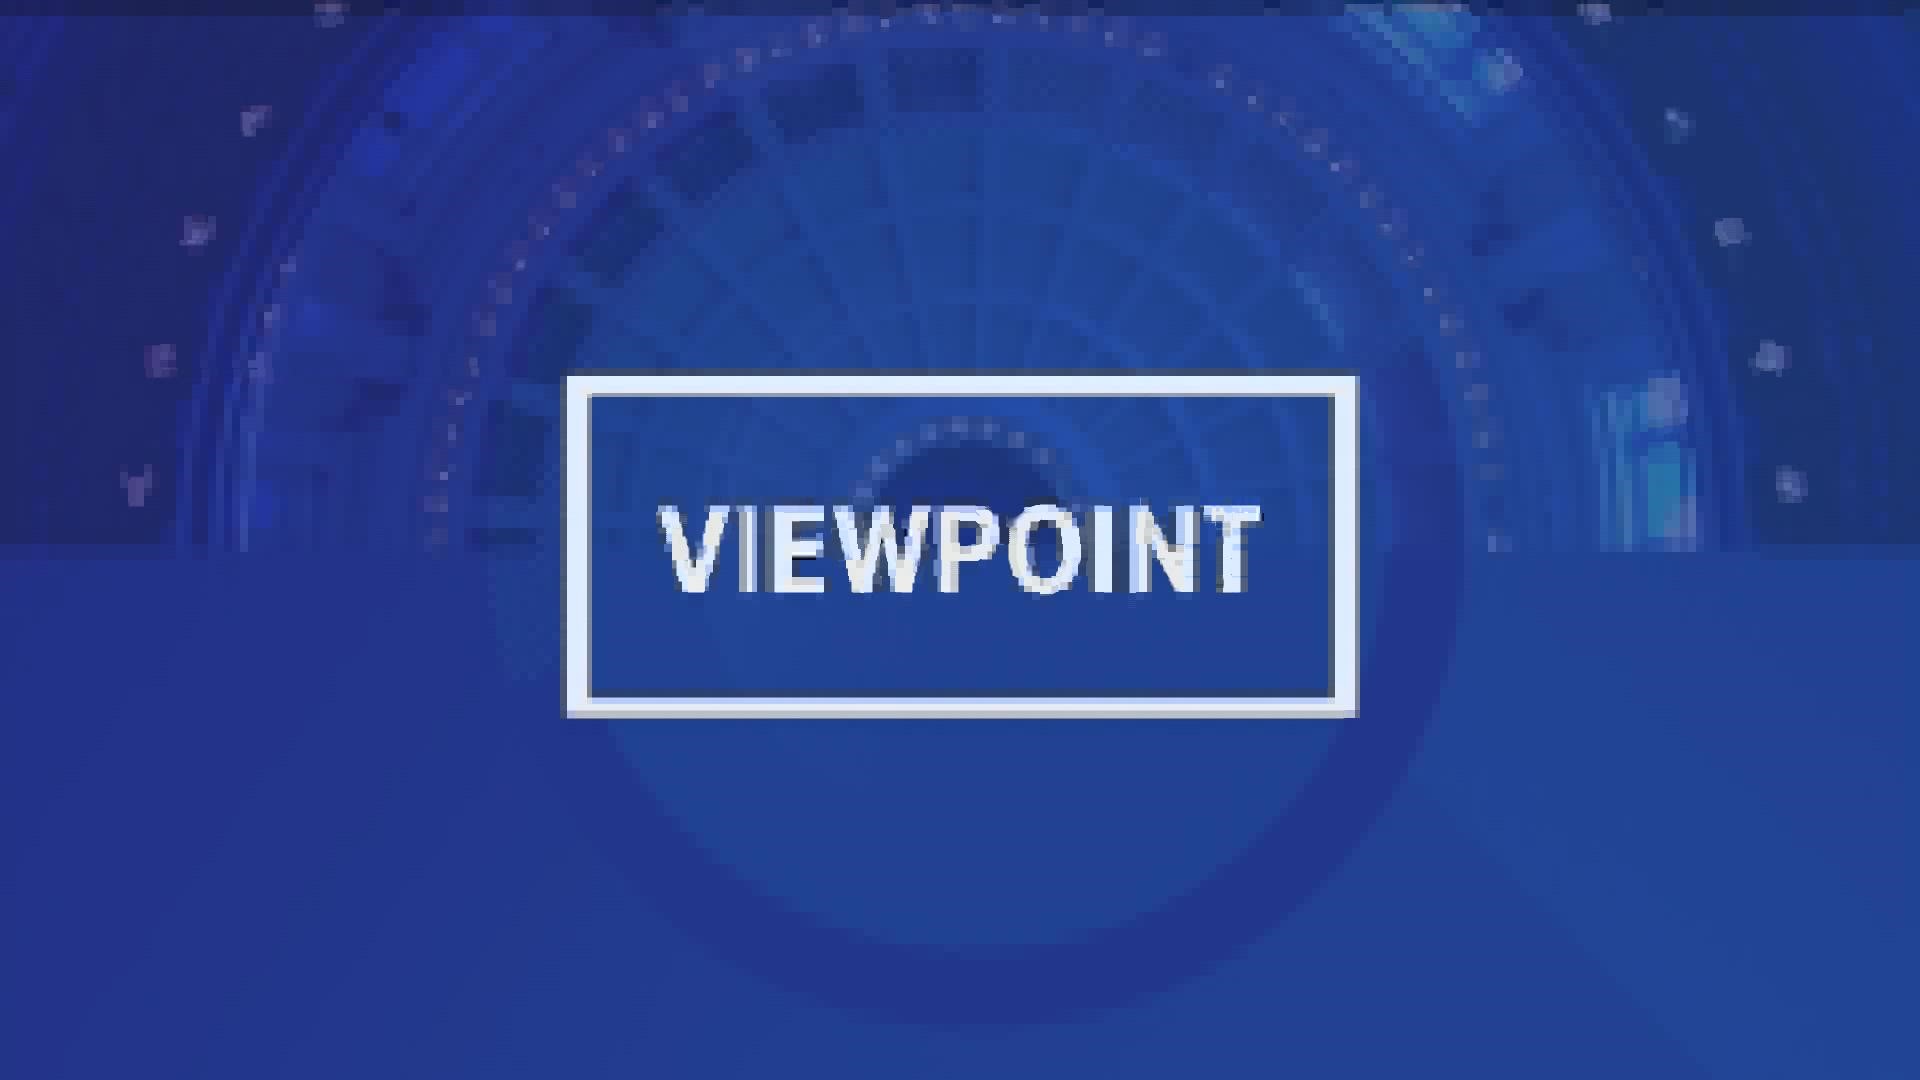 This episode of Viewpoint focuses on the new Boise PD division dedicated to innovative training, as well as the retirement of long-time CWI President Bert Glandon.